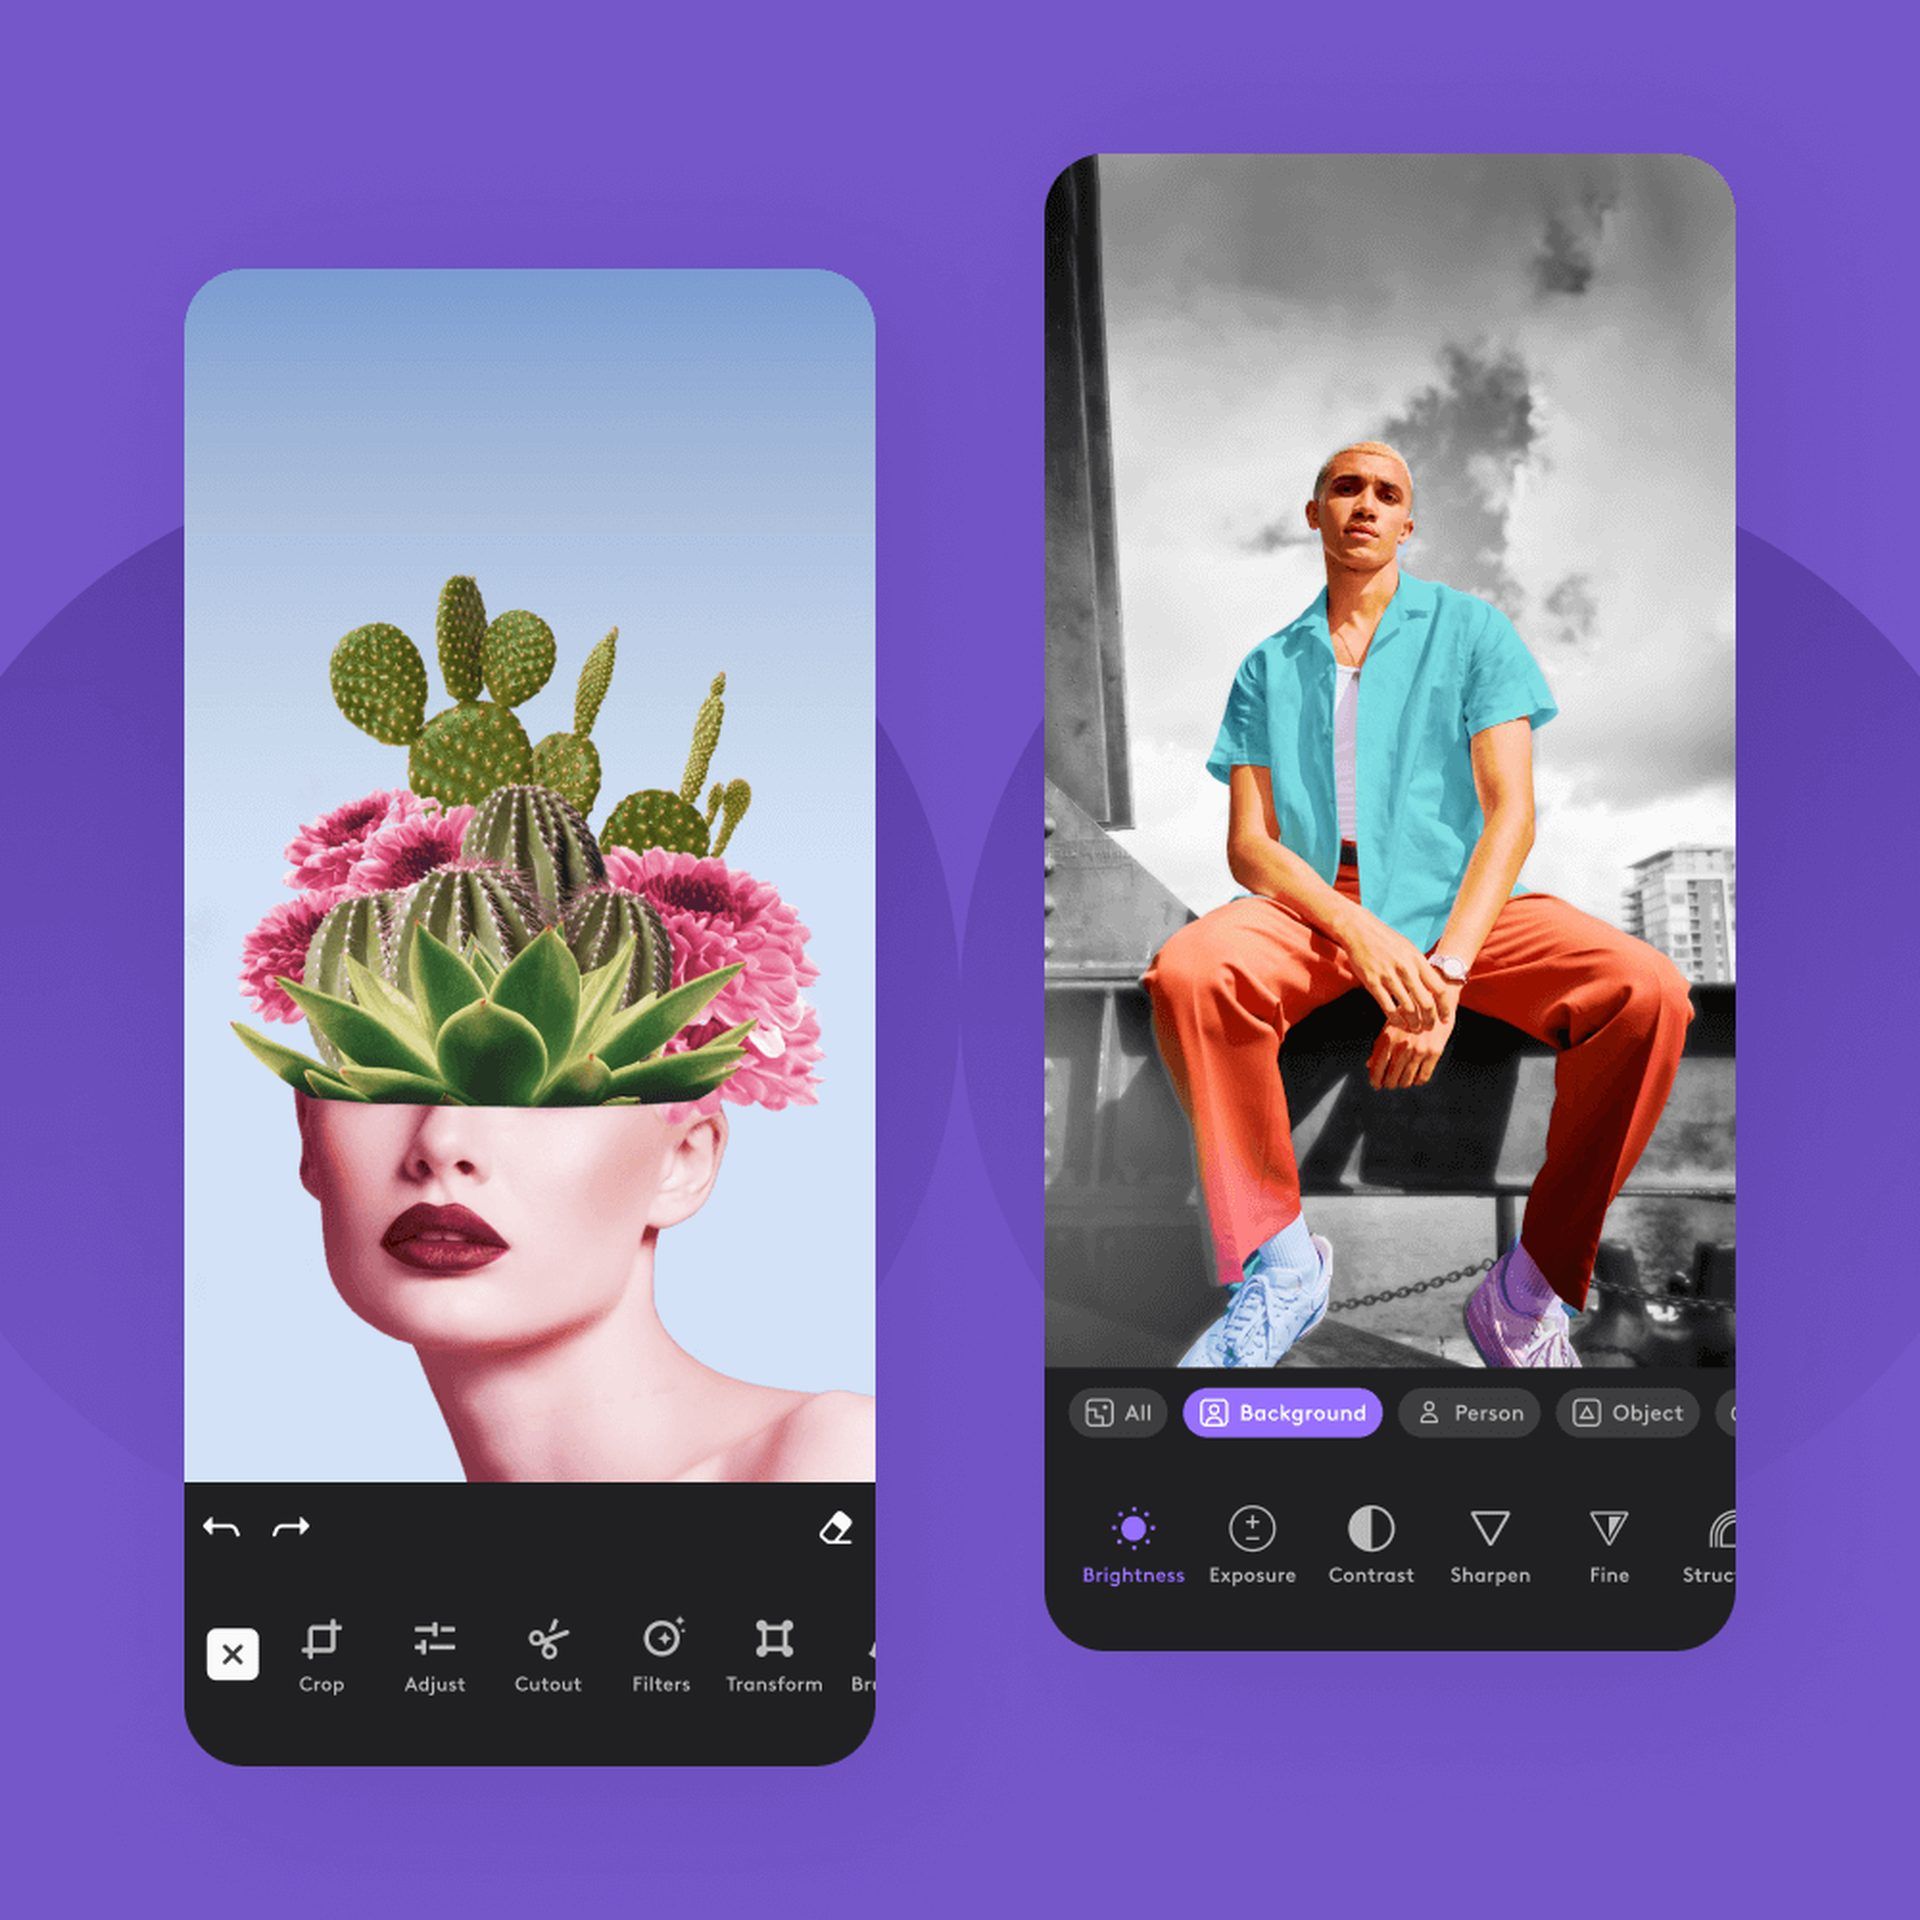 What Is Photoleap AI photo editor? Learn how to use Photoleap AI tools and fascinate your audience and leave a lasting impression. Keep reading...